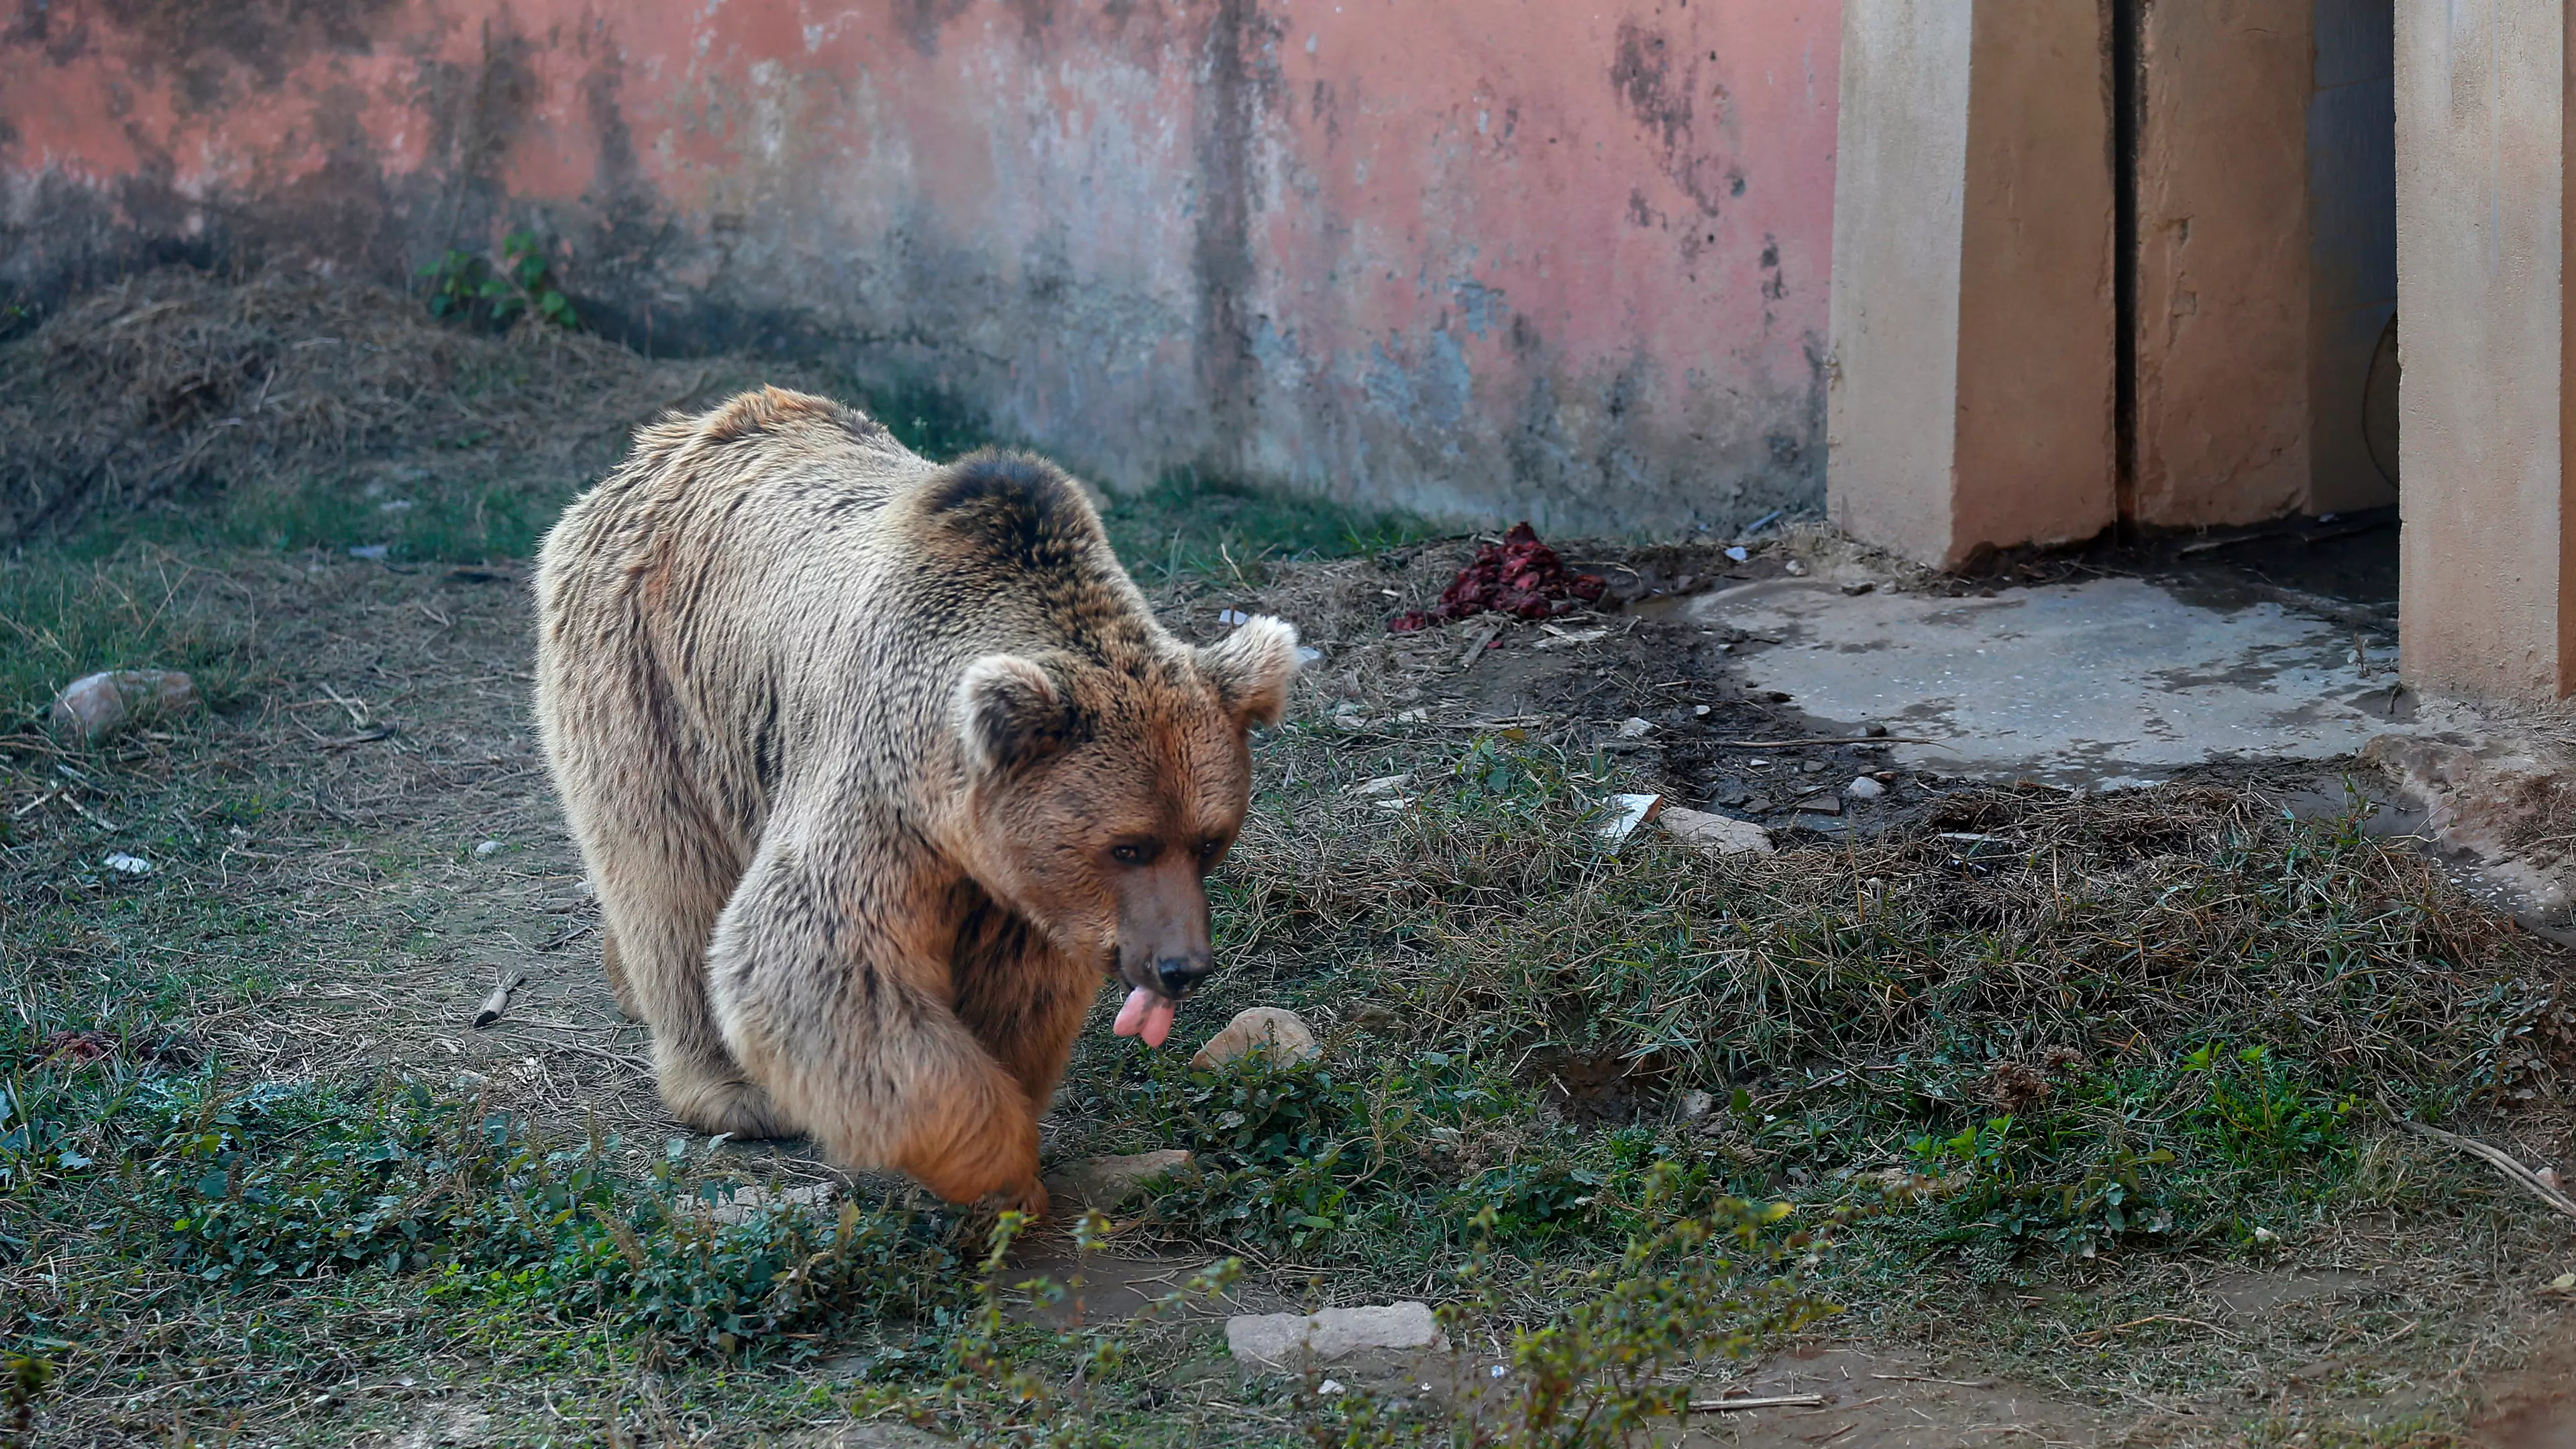 Two Bears Are Last To Leave 'World's Worst Zoo' In Pakistan